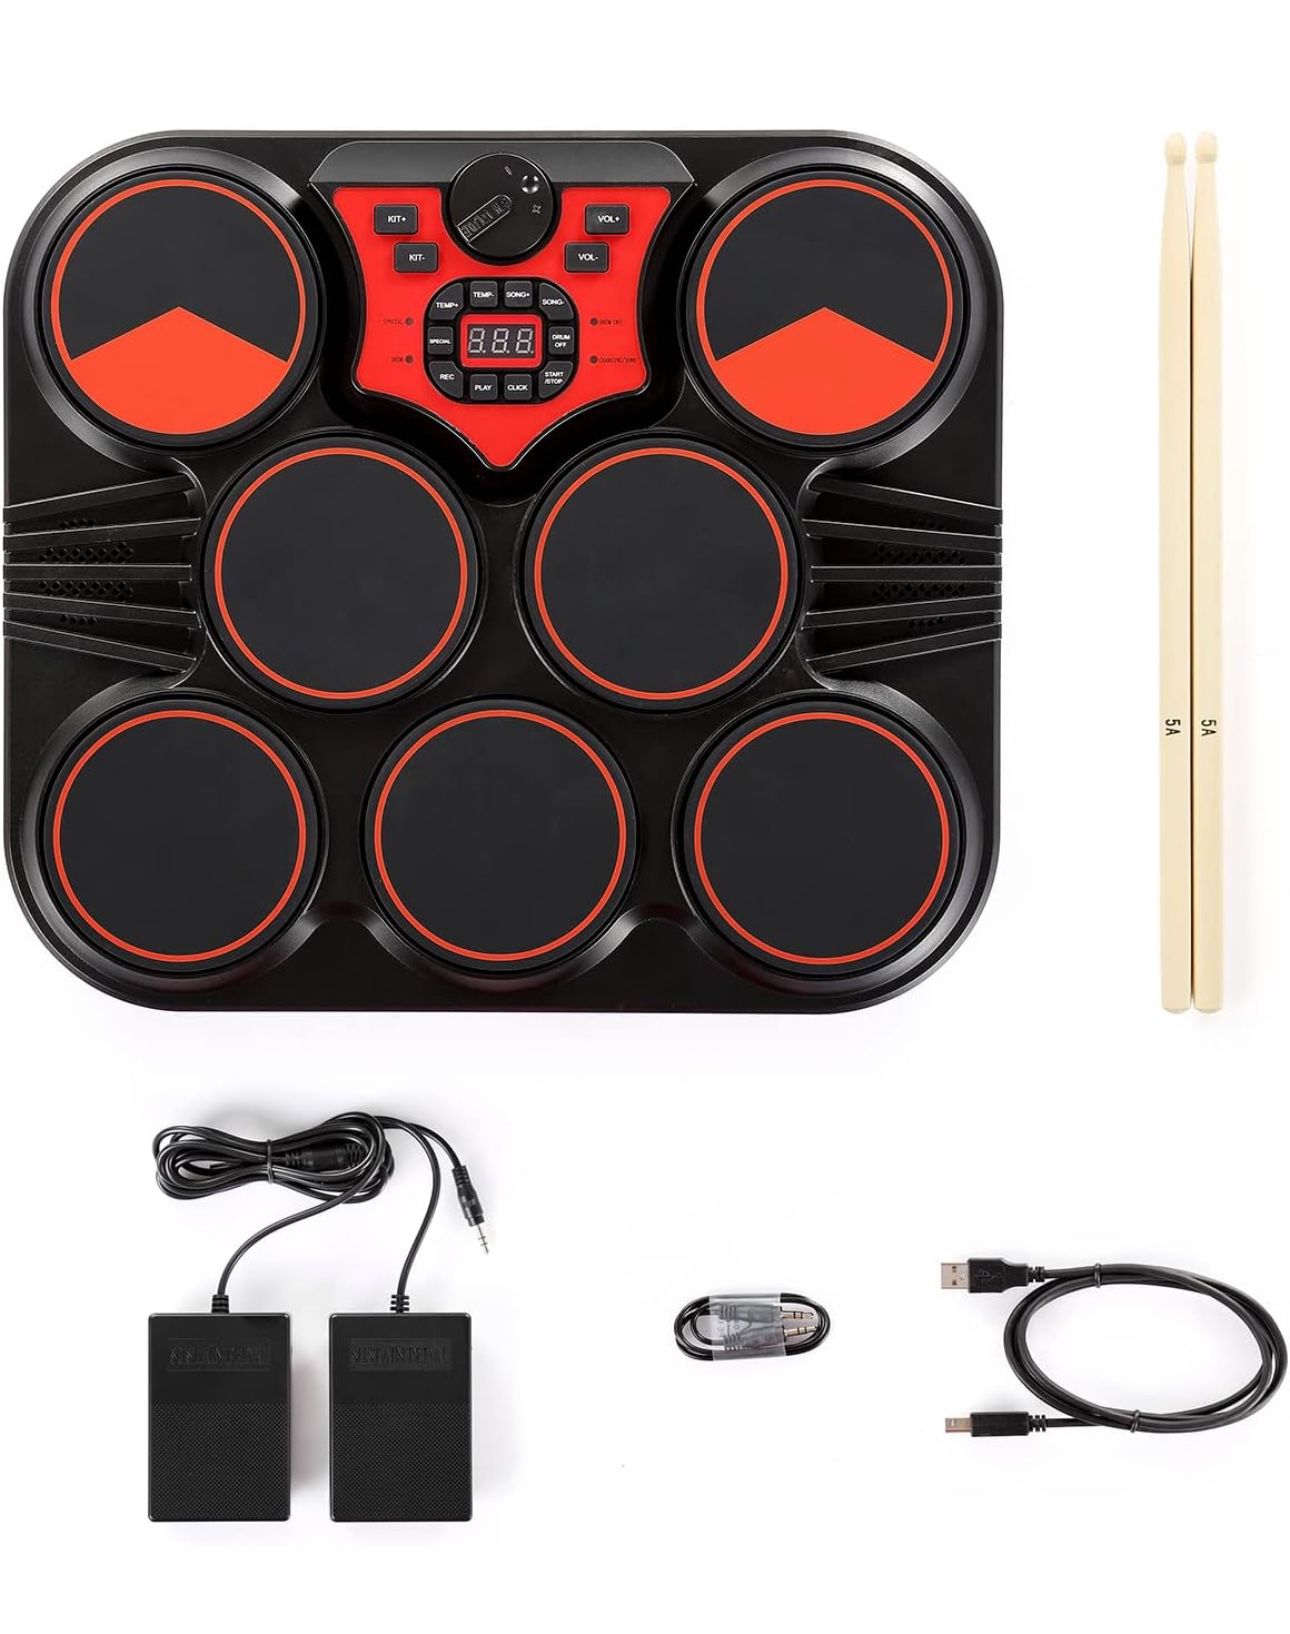 Electronic Drum Set, Tabletop Electric Drum Kit, 7 Pad Portable Electric Drum Set with Digital Panel, Built-in Speakers - Toy Toys Wholesale 